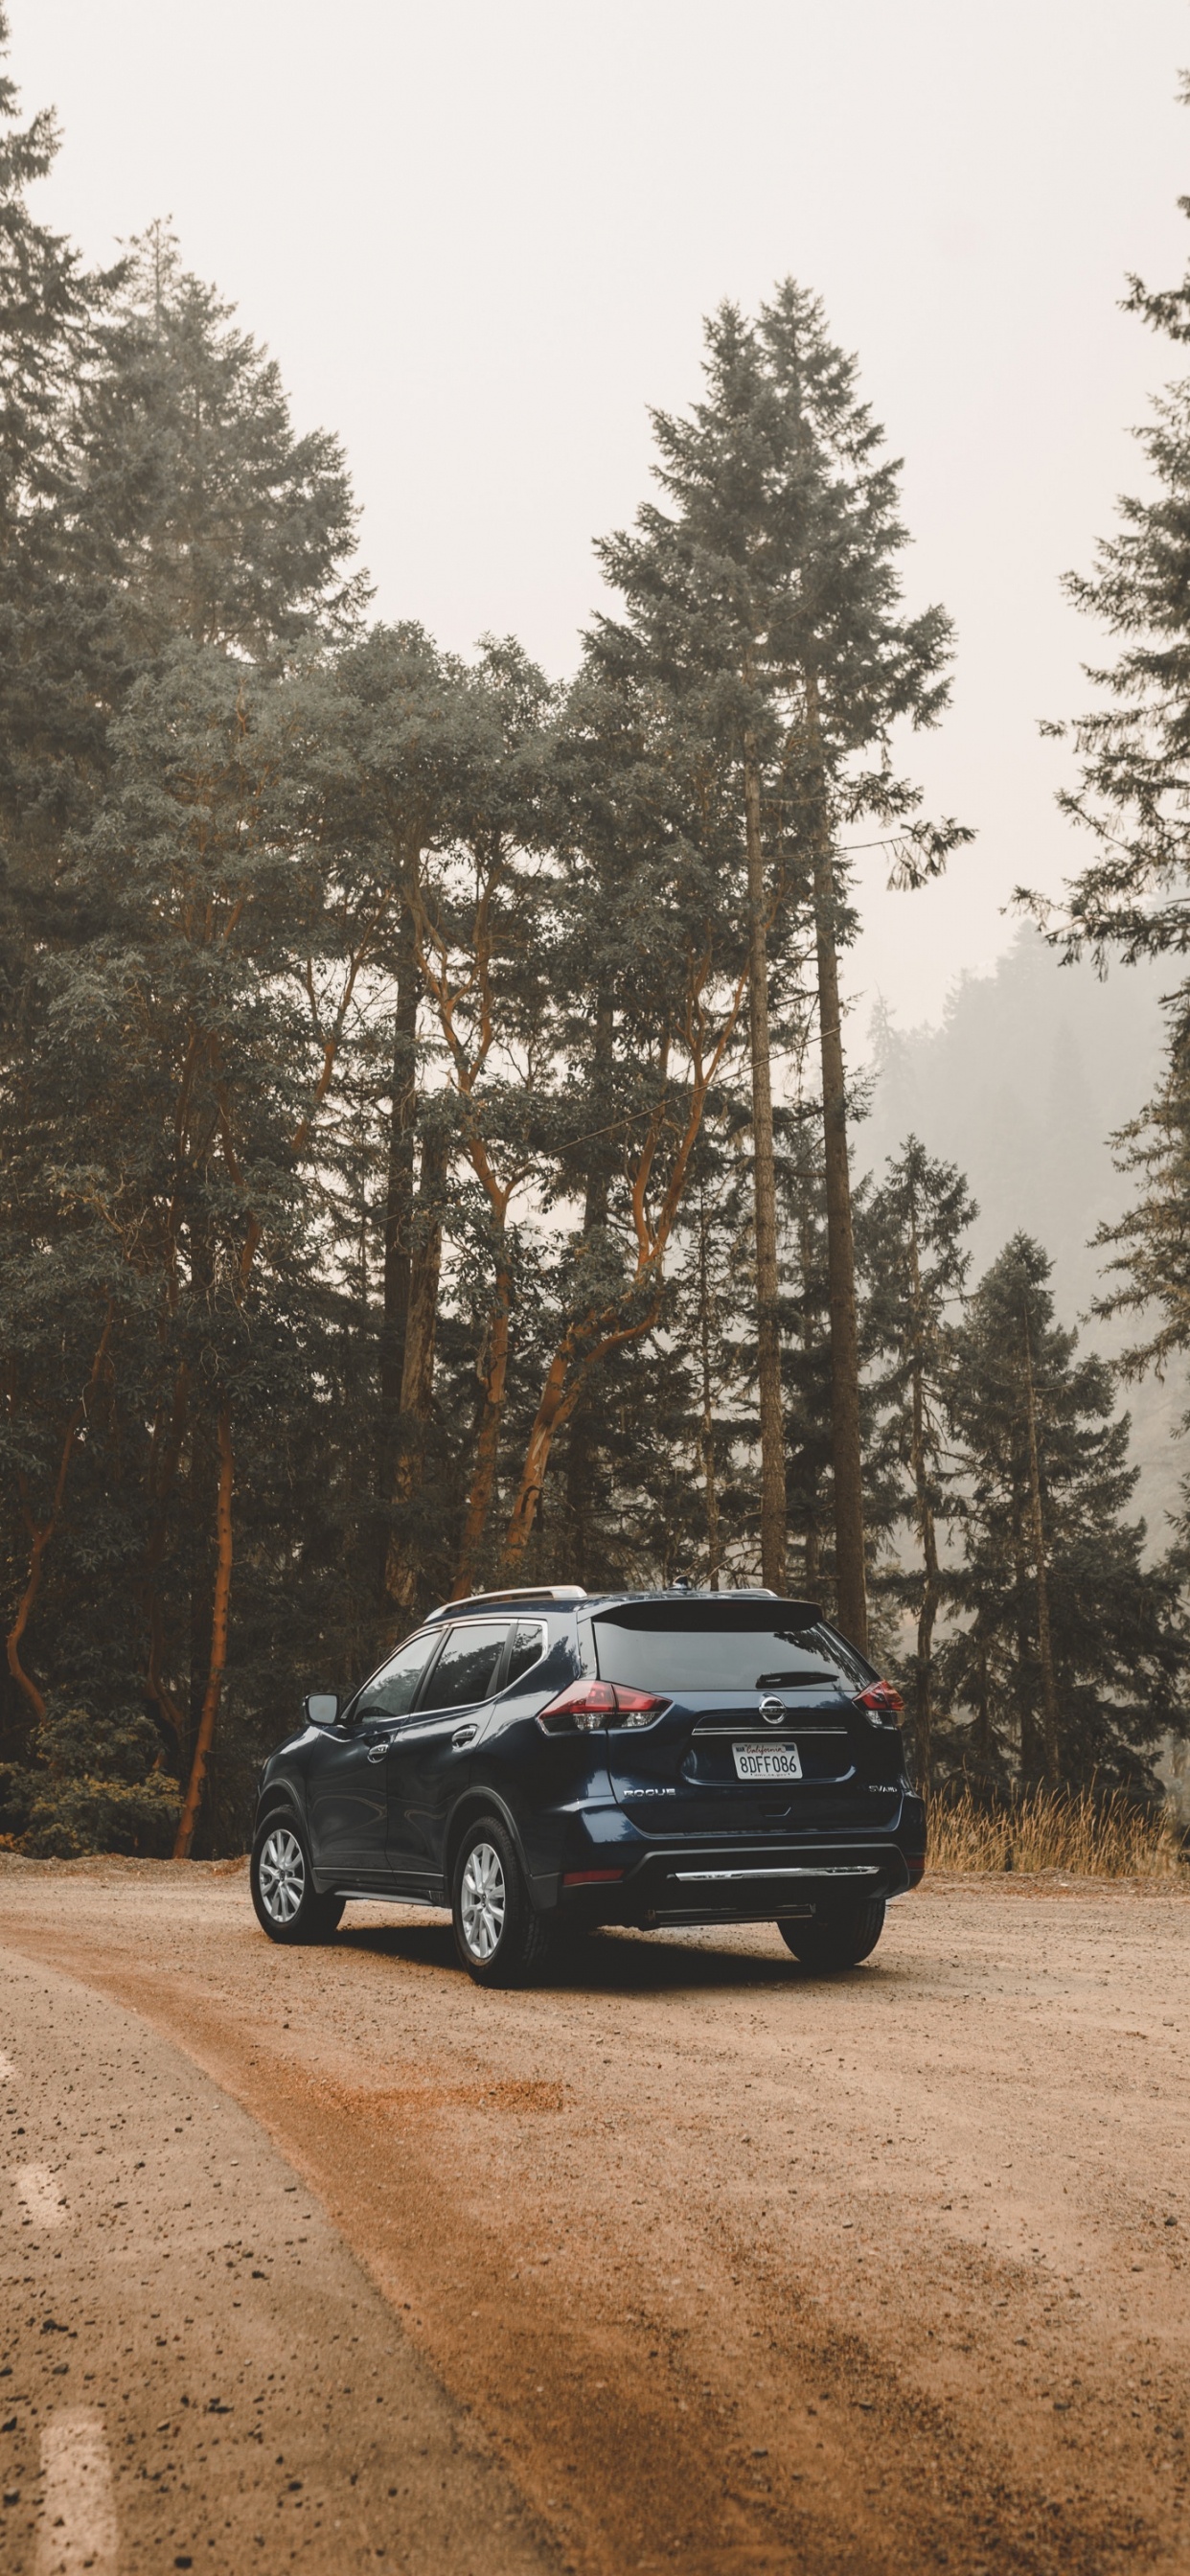 Black Car on Dirt Road Near Trees During Daytime. Wallpaper in 1242x2688 Resolution